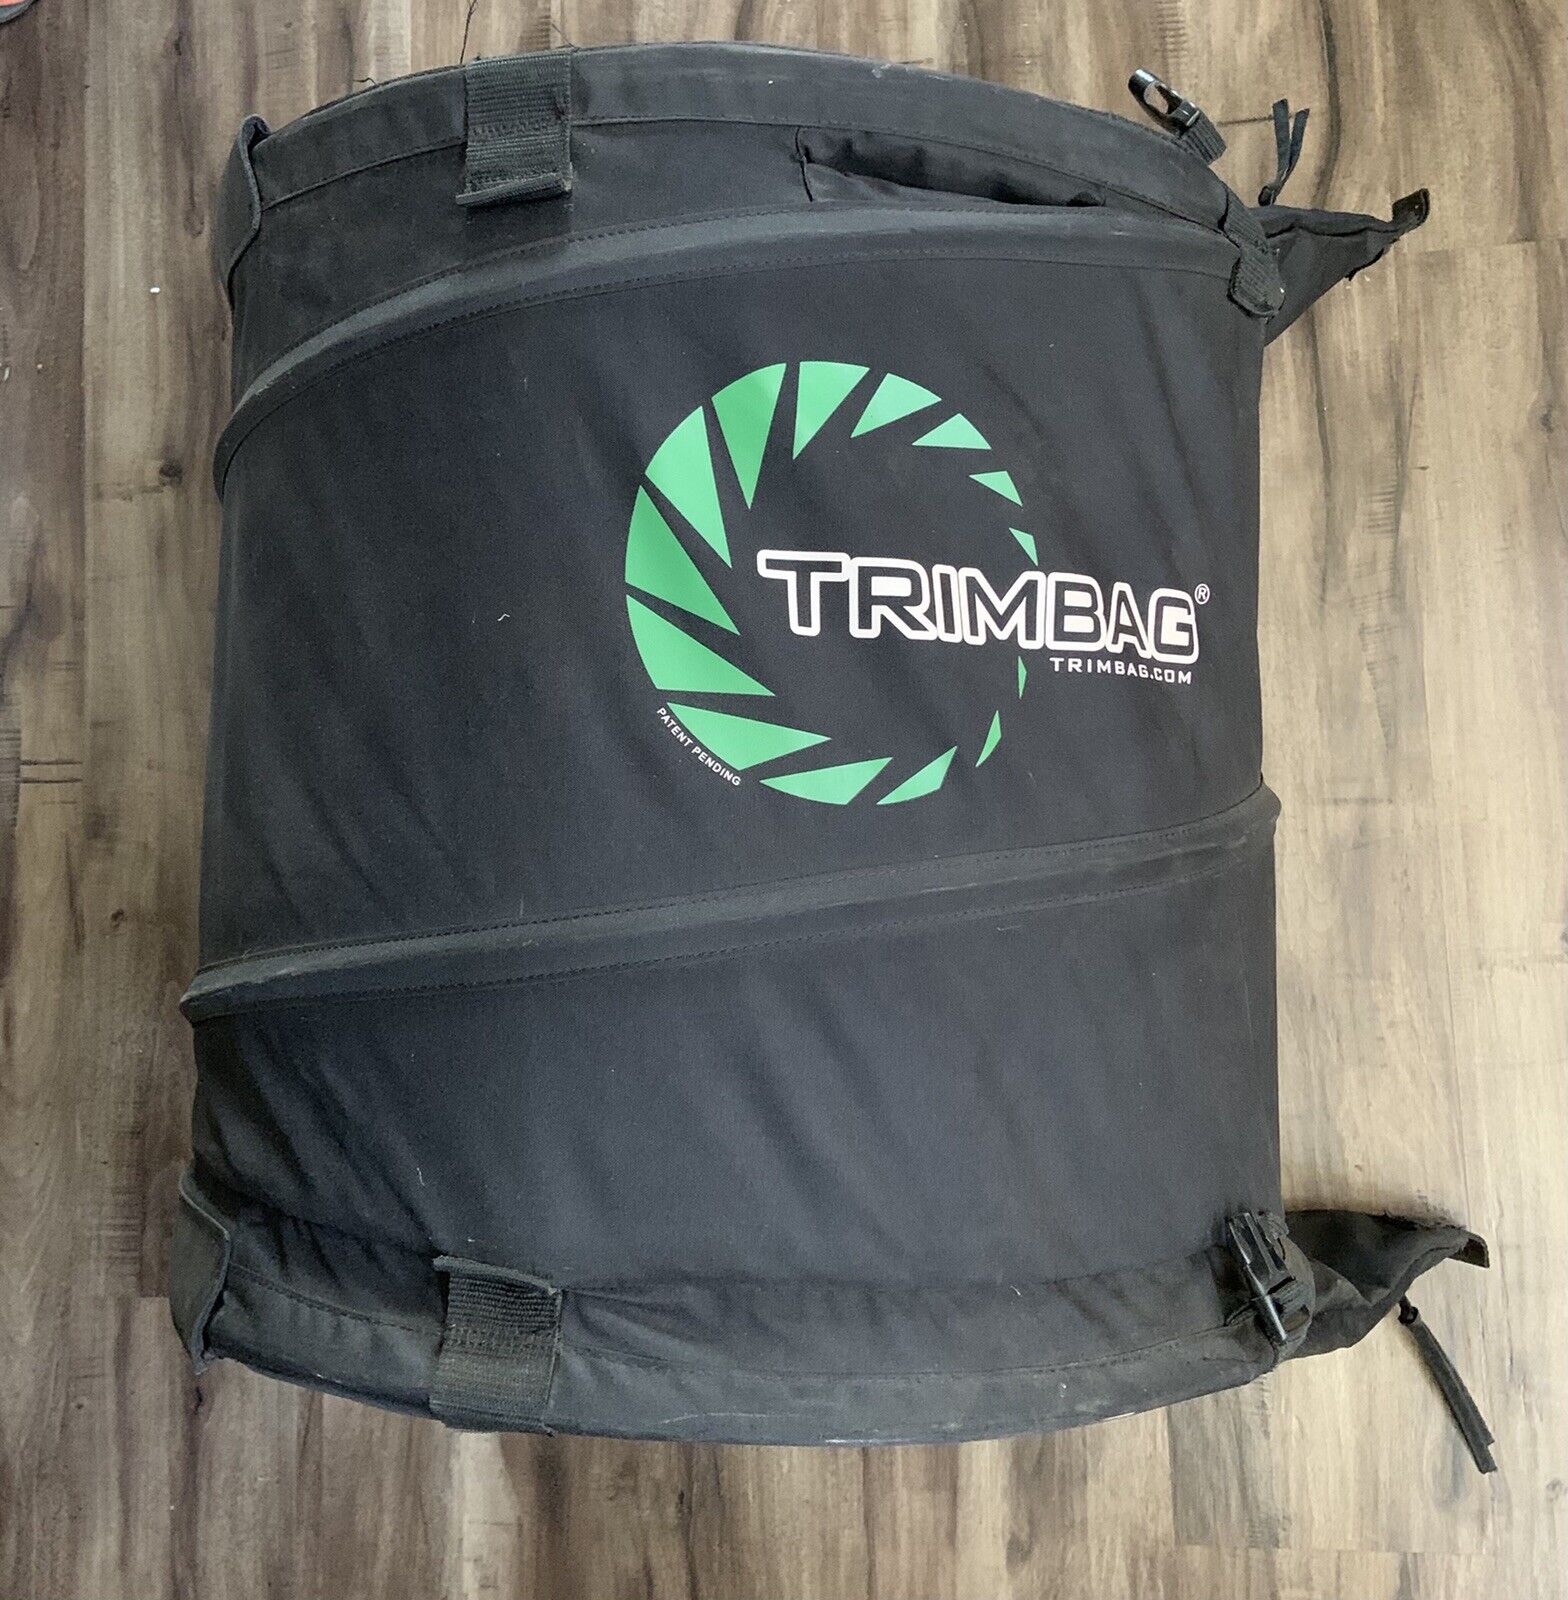 Trimbag Dry Trimmer Weed Trim Bag Cannabis Trimmer Used As Is